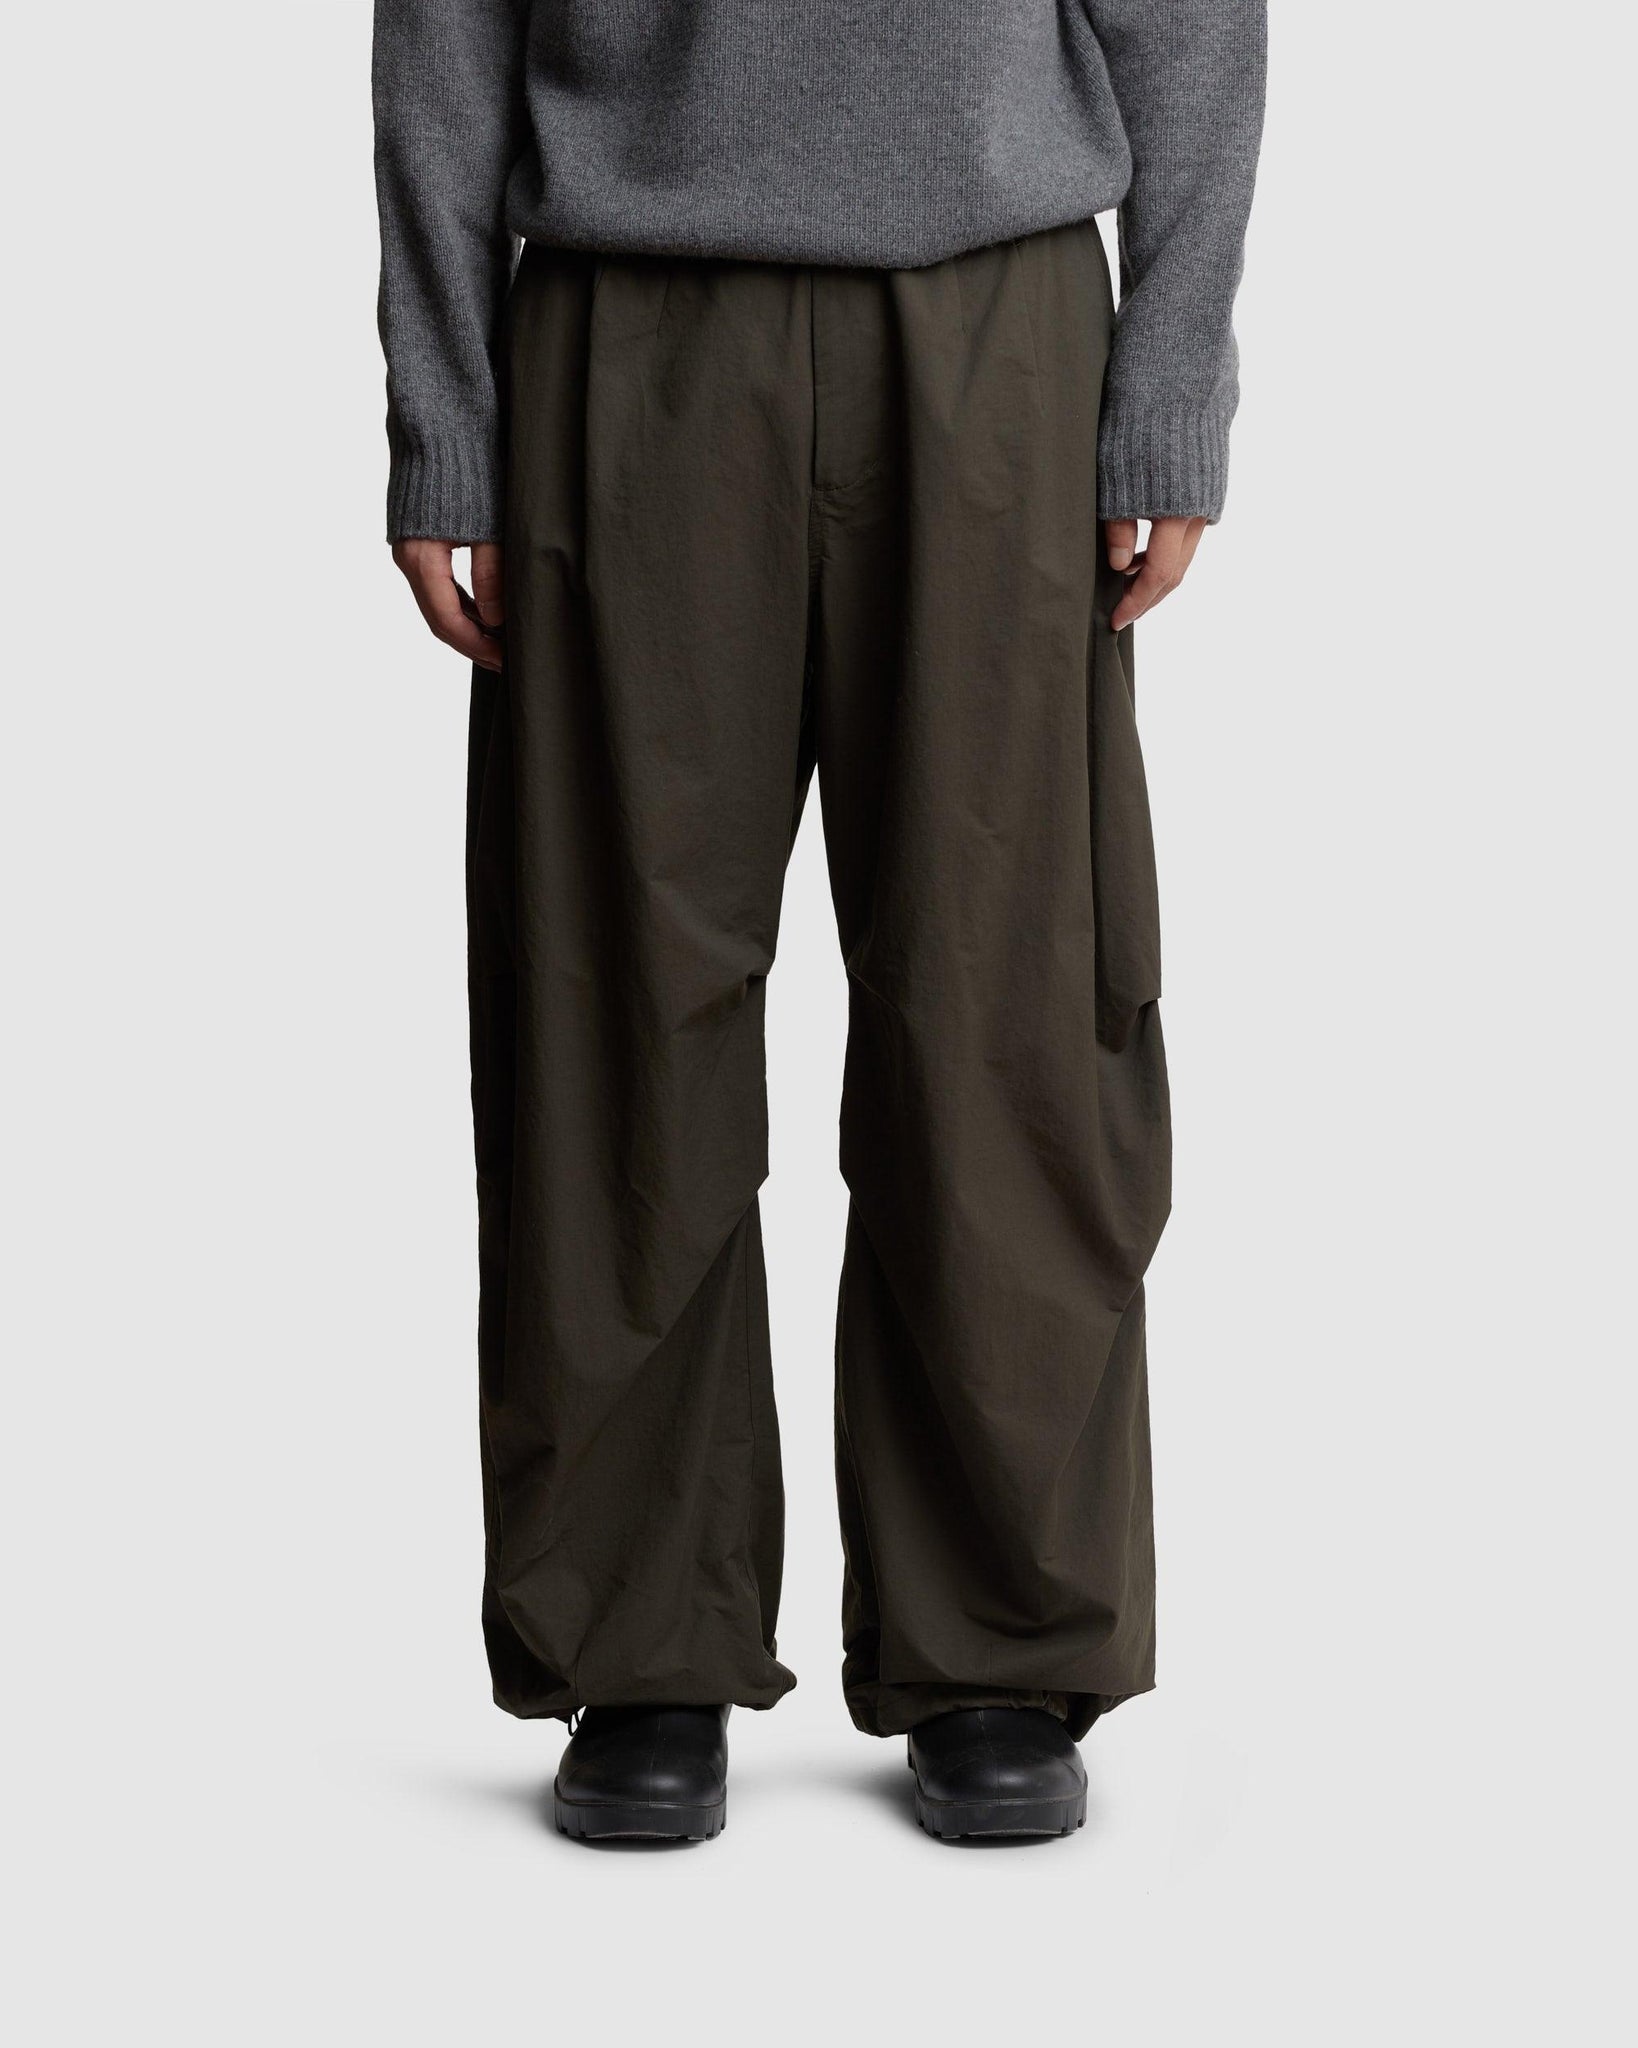 Cotton Nylon Fatigue Pants - {{ collection.title }} - Chinatown Country Club 